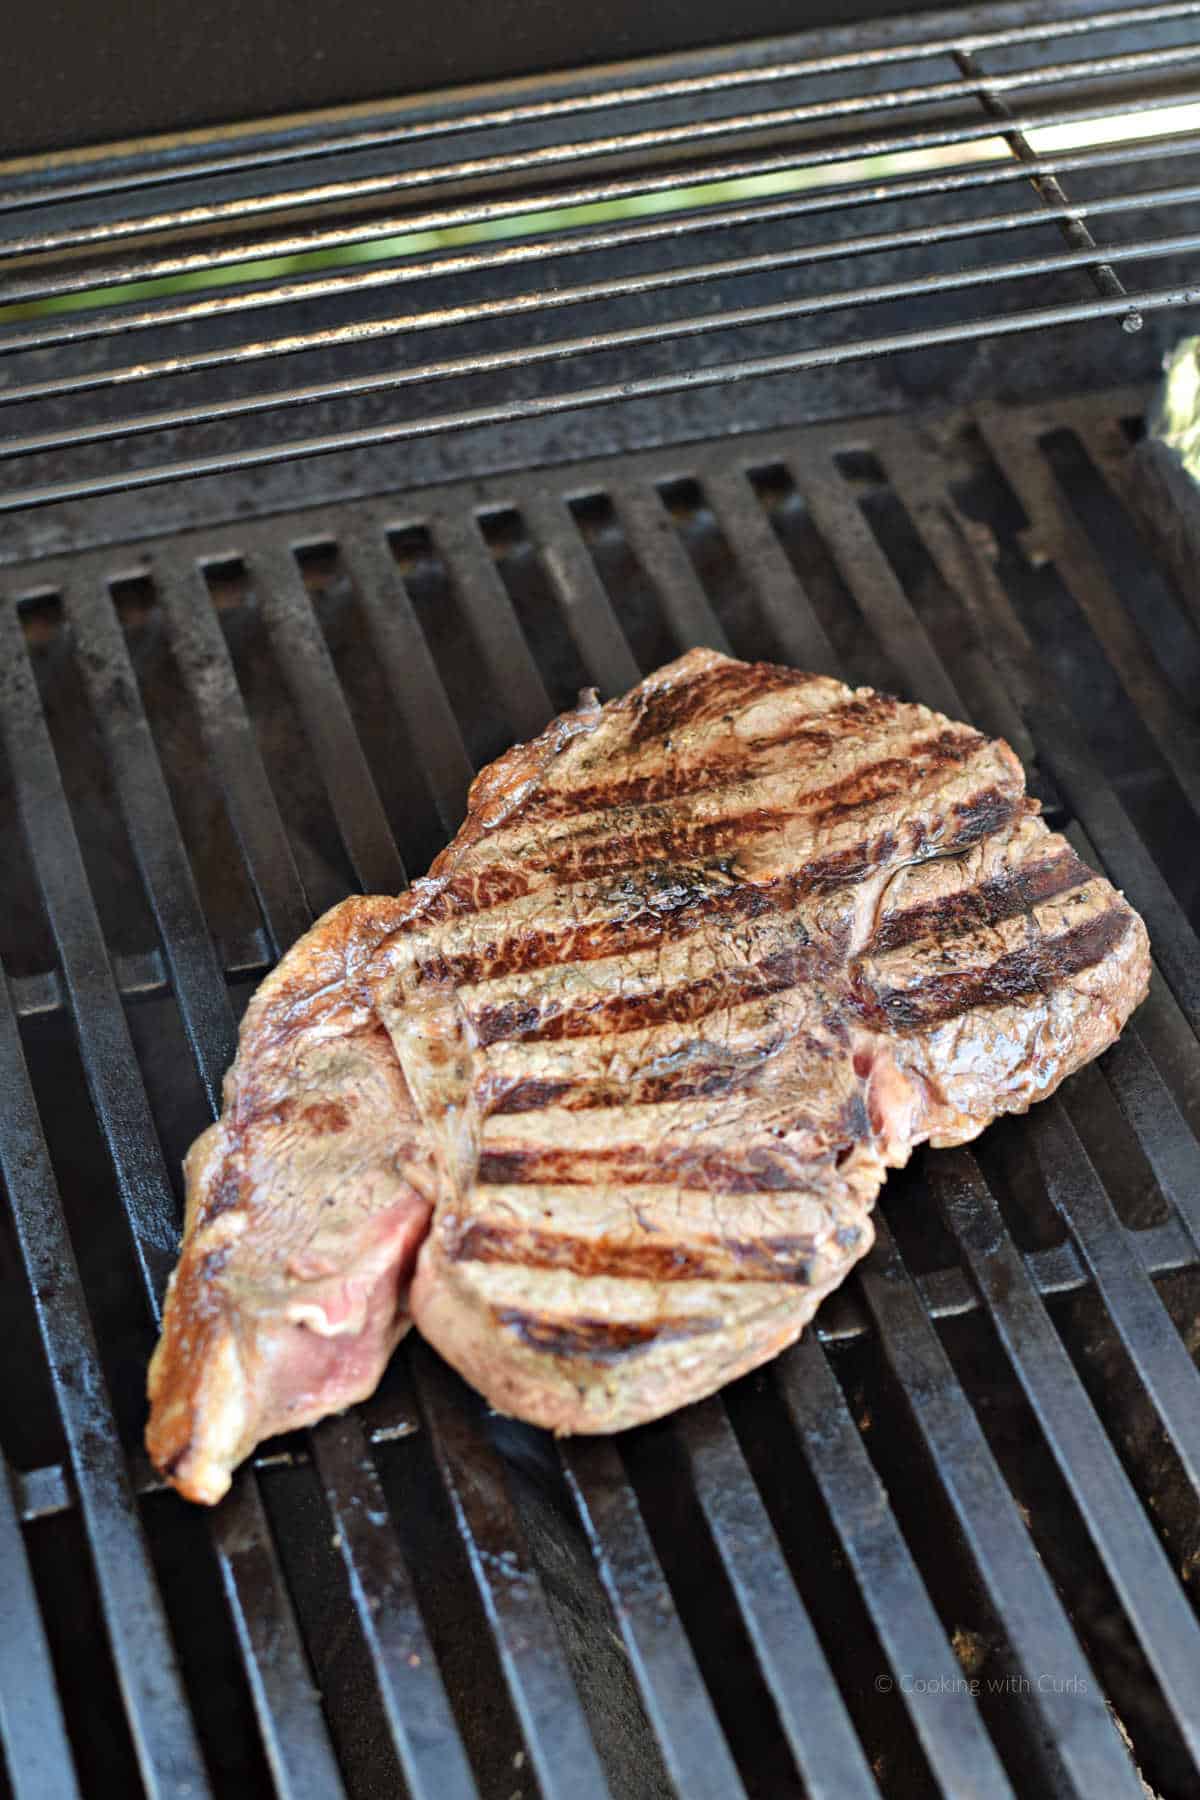 Grilled sirloin steak on the grill.